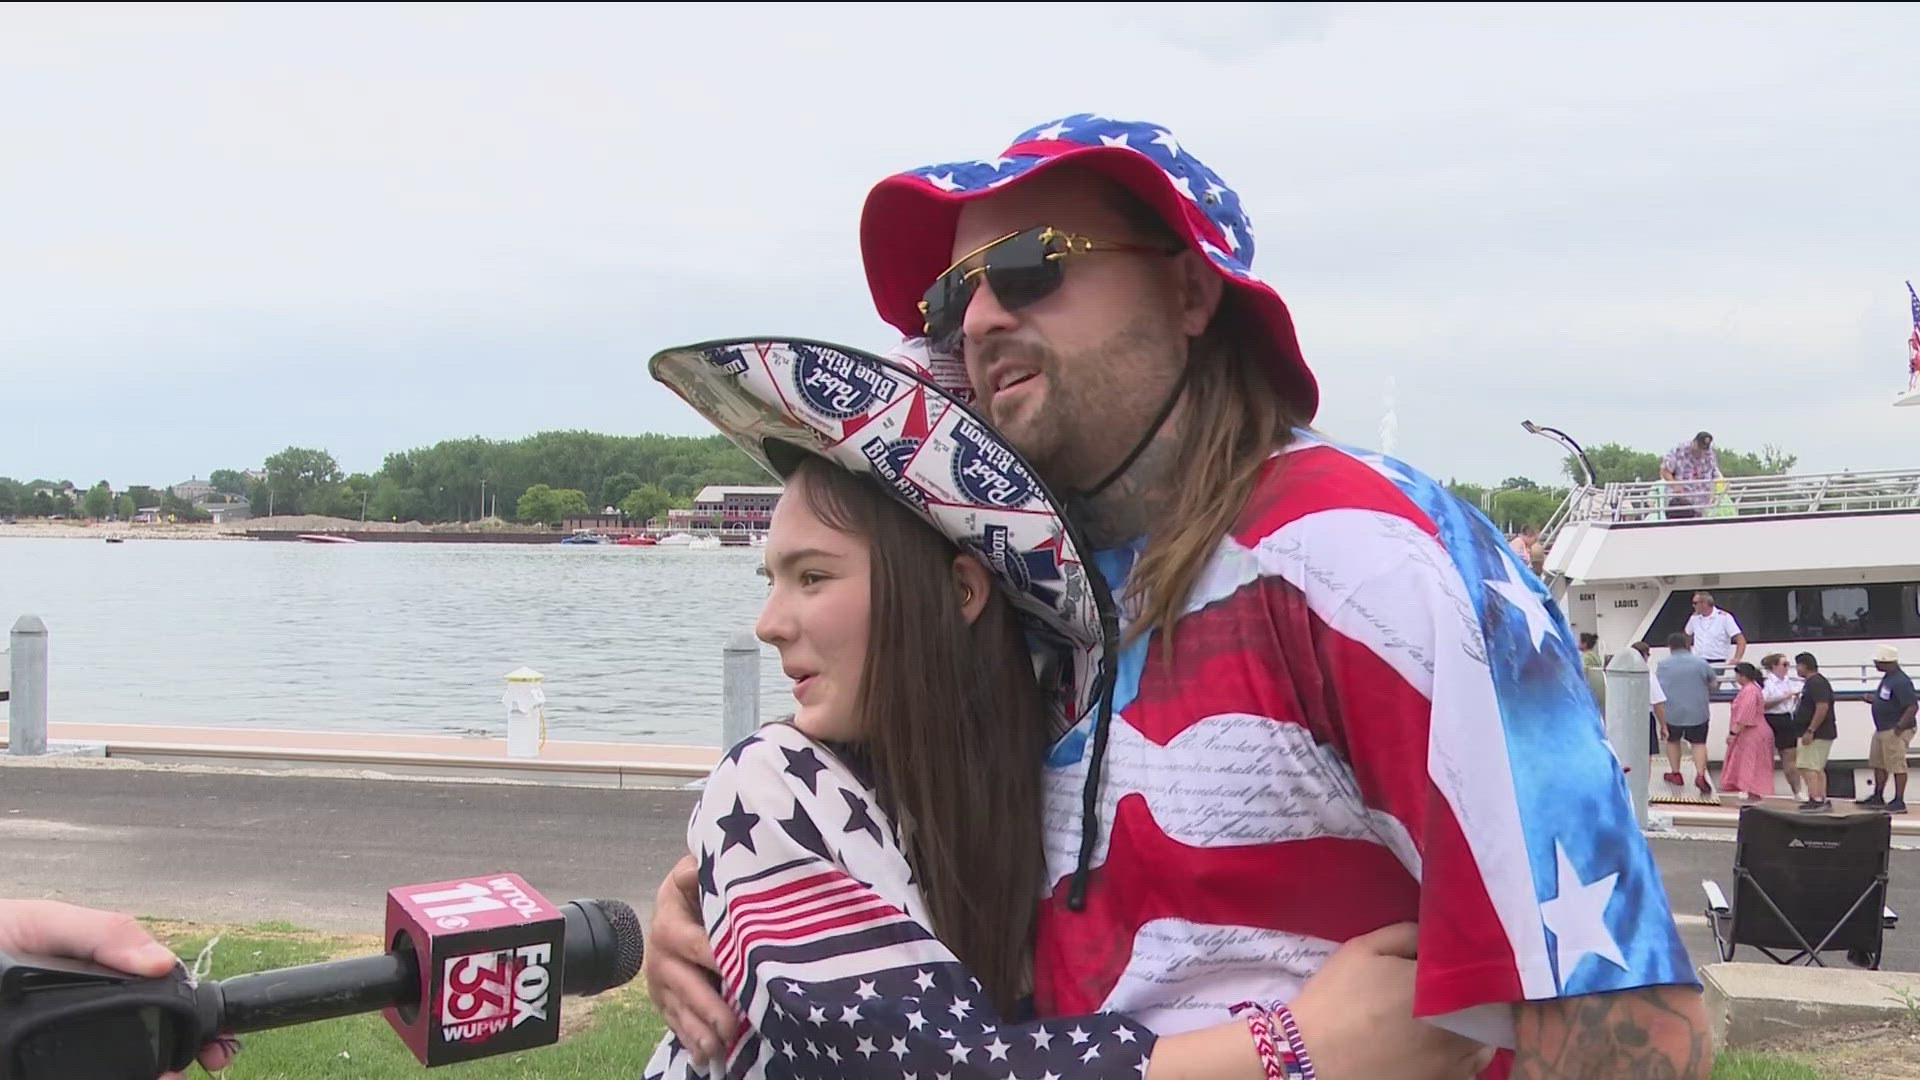 WTOL 11 spoke with locals who were out and about on the Fourth of July and excited for the night's fireworks show.